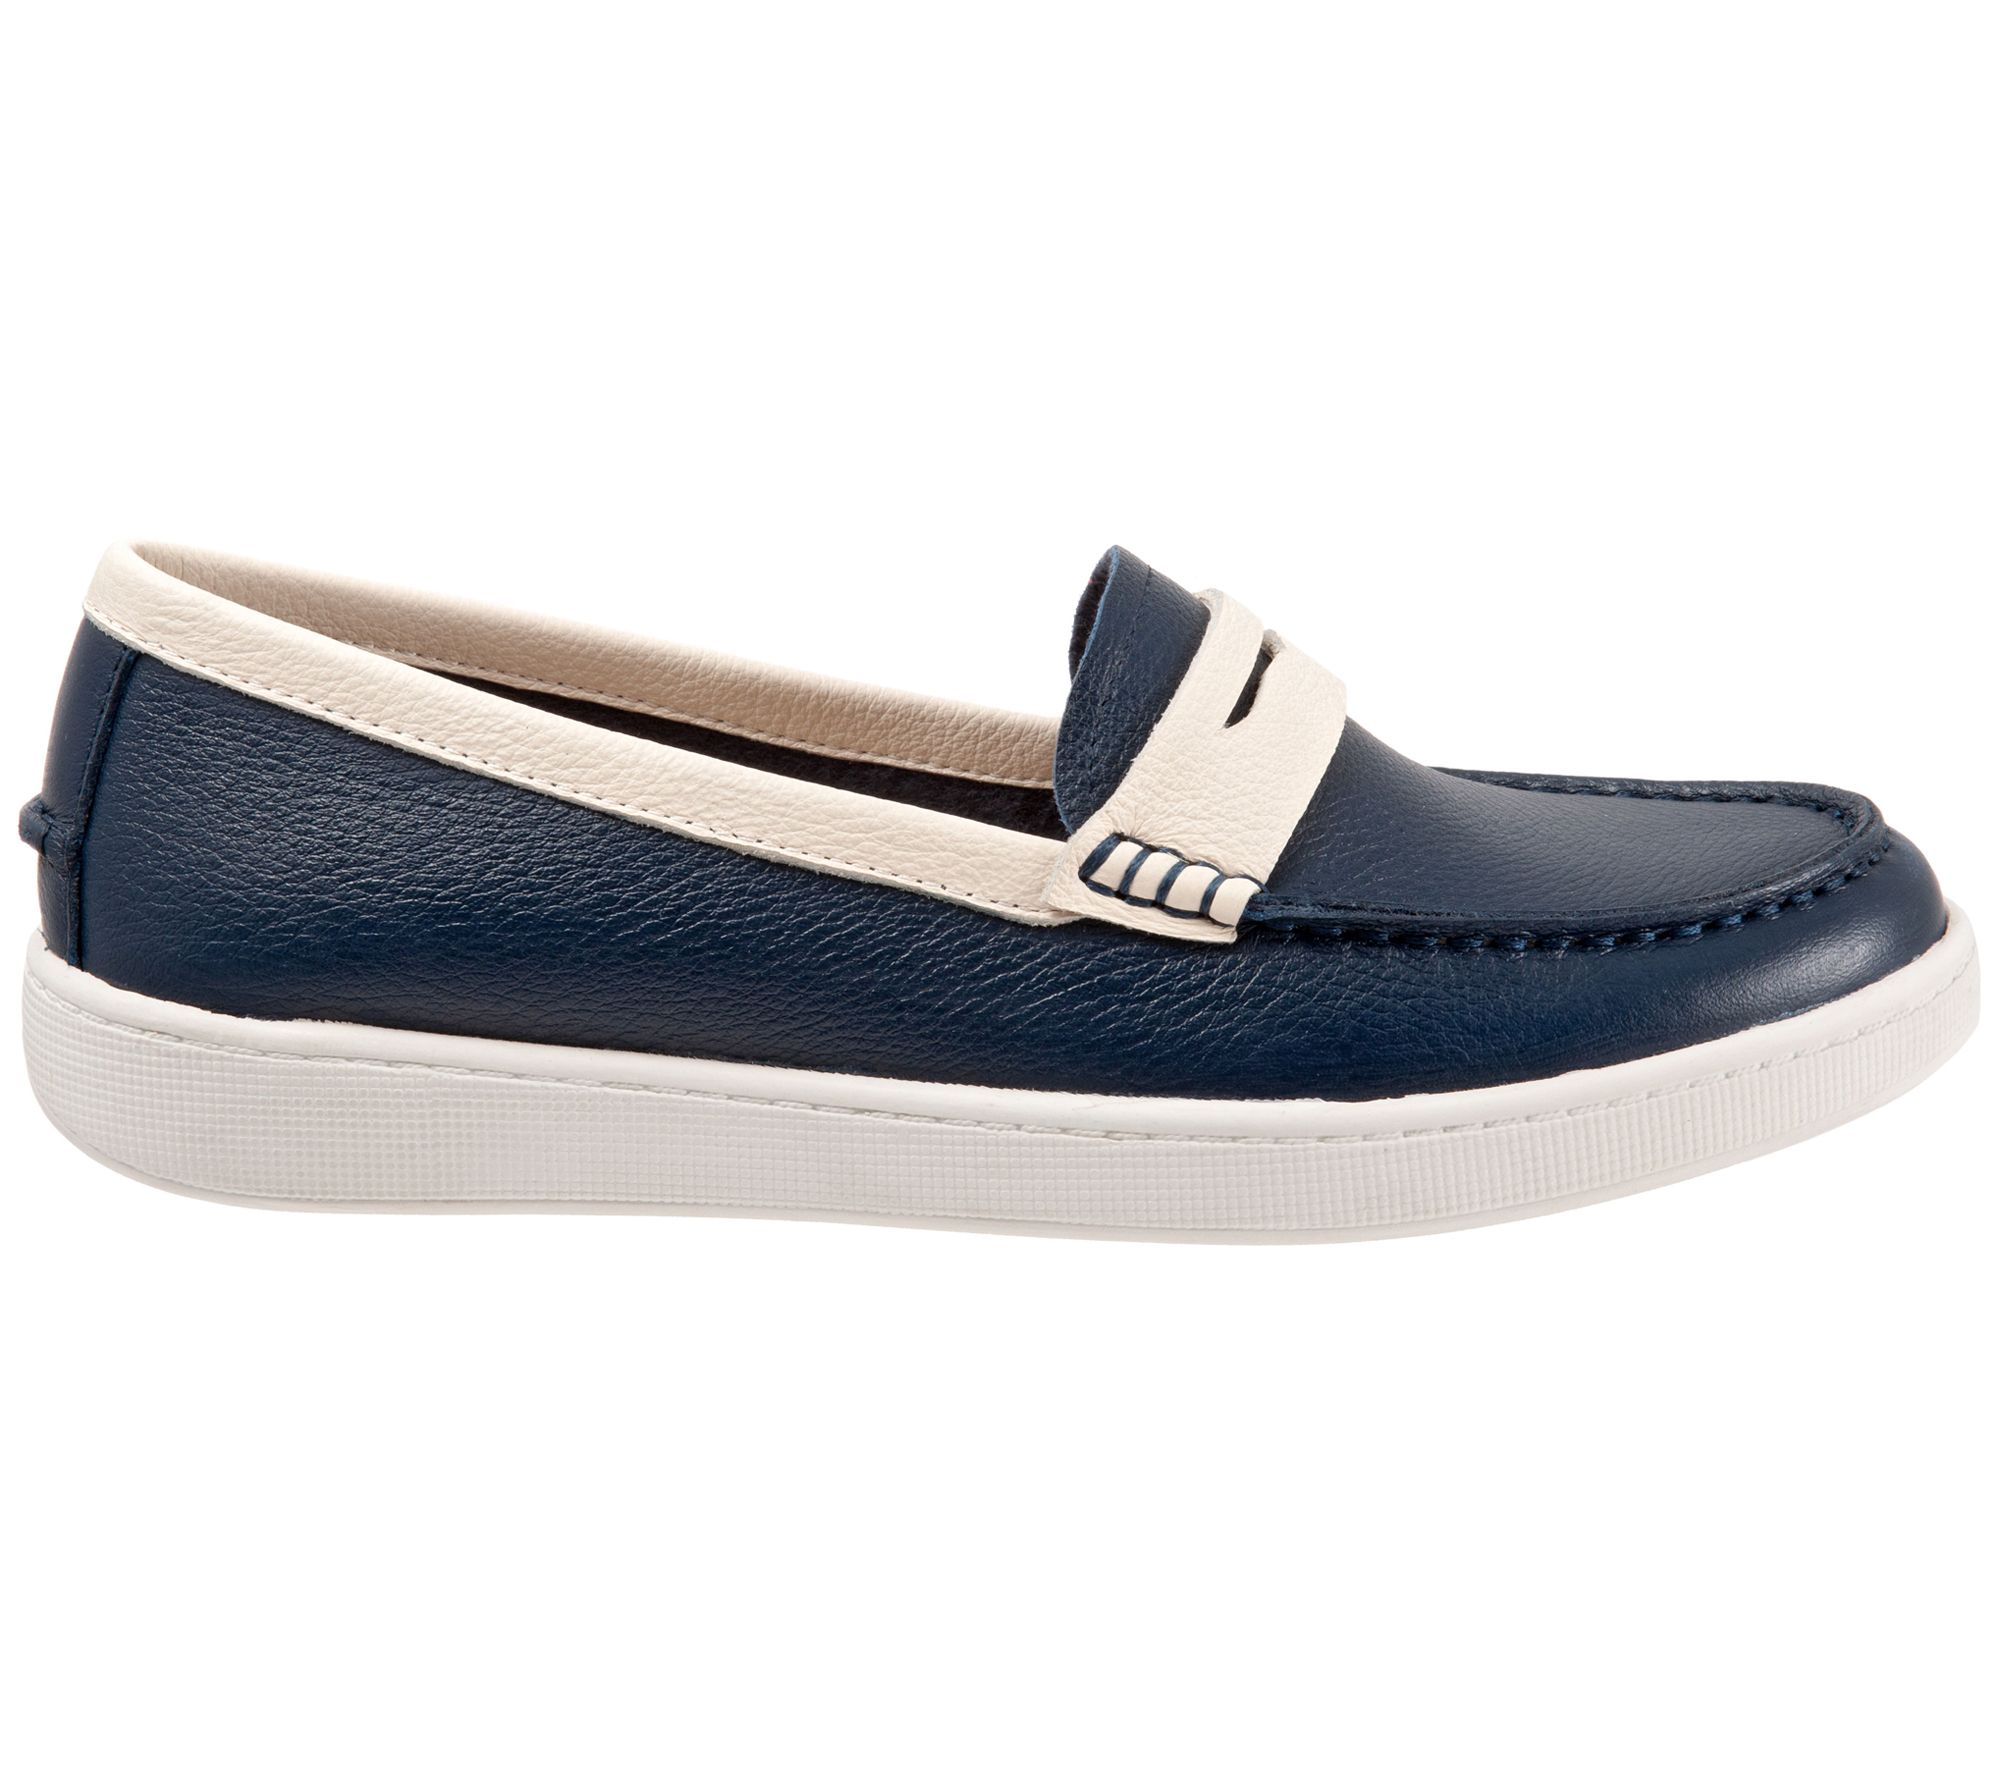 Trotters Leather Casual Slip-On Loafers - Dina - QVC.com